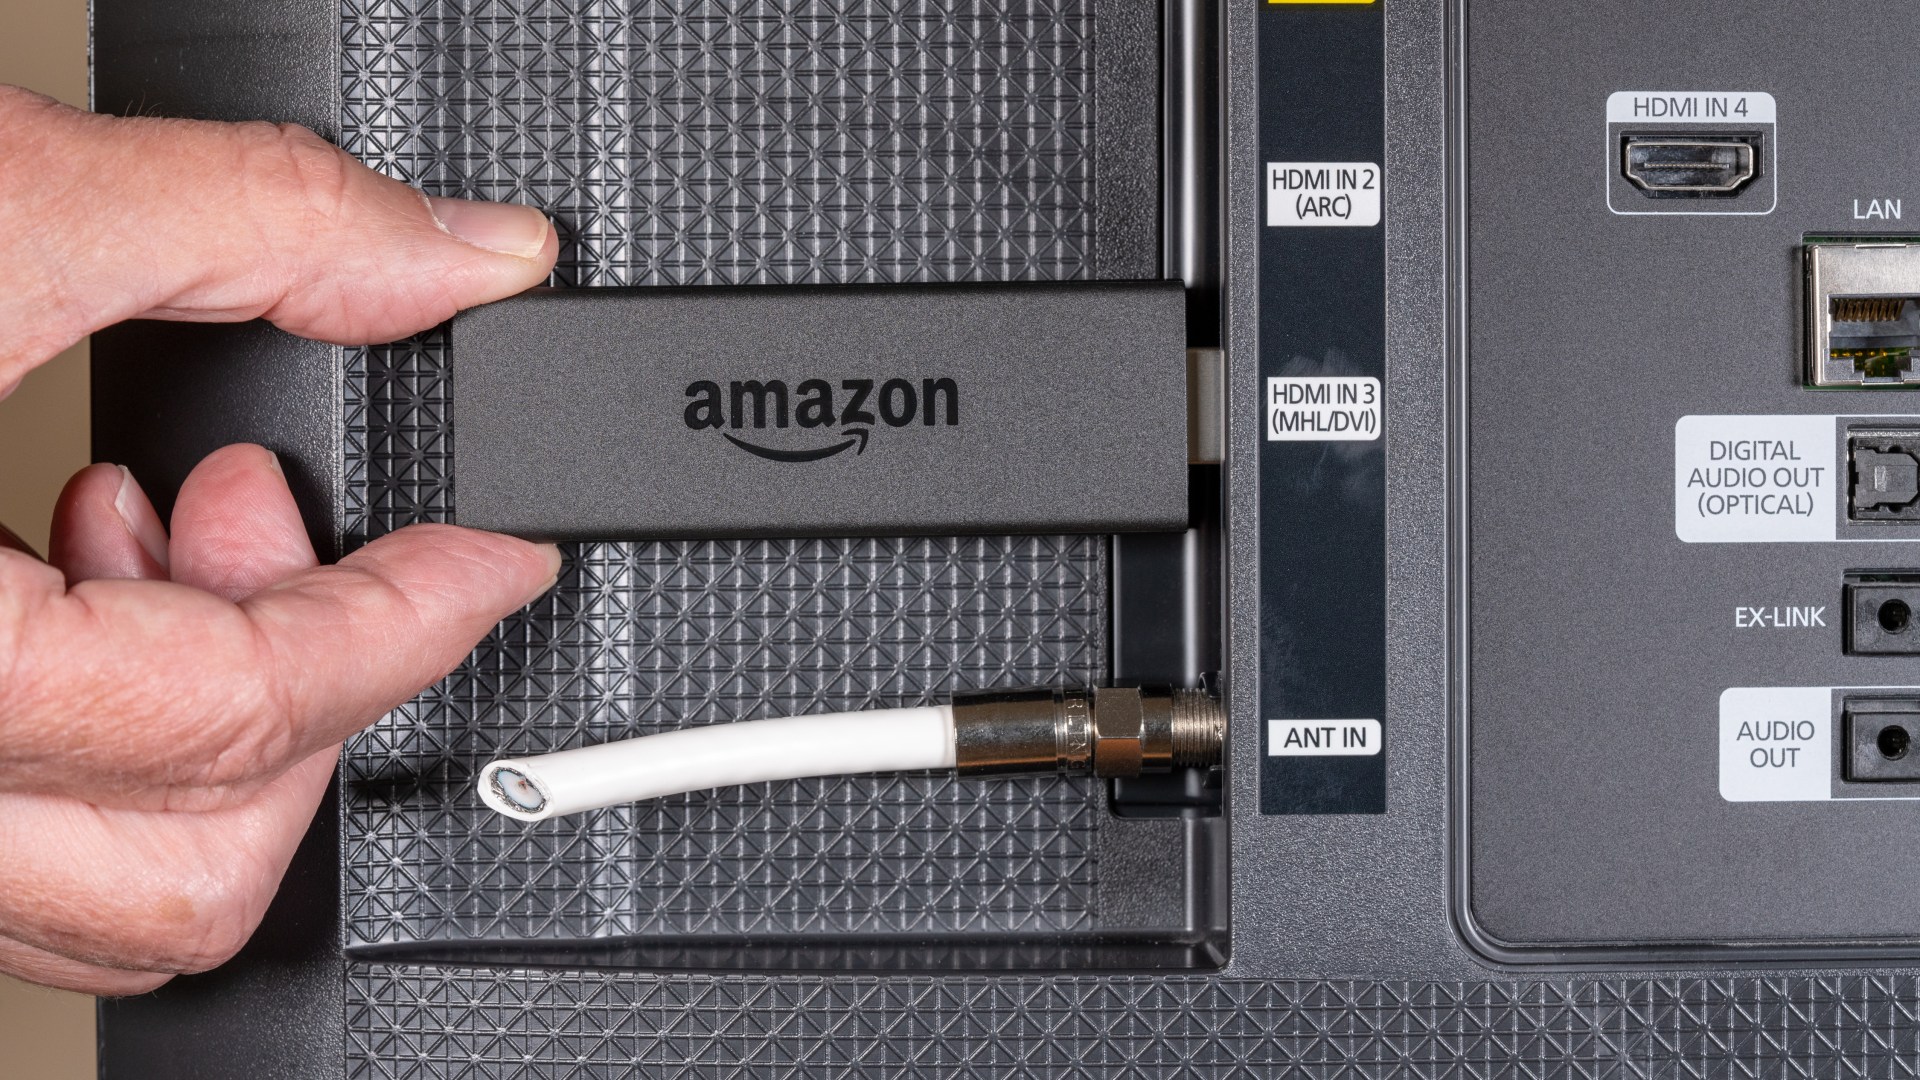 Remote control chaos as Amazon Fire TV Stick owners are warned popular free feature is blocked [Video]